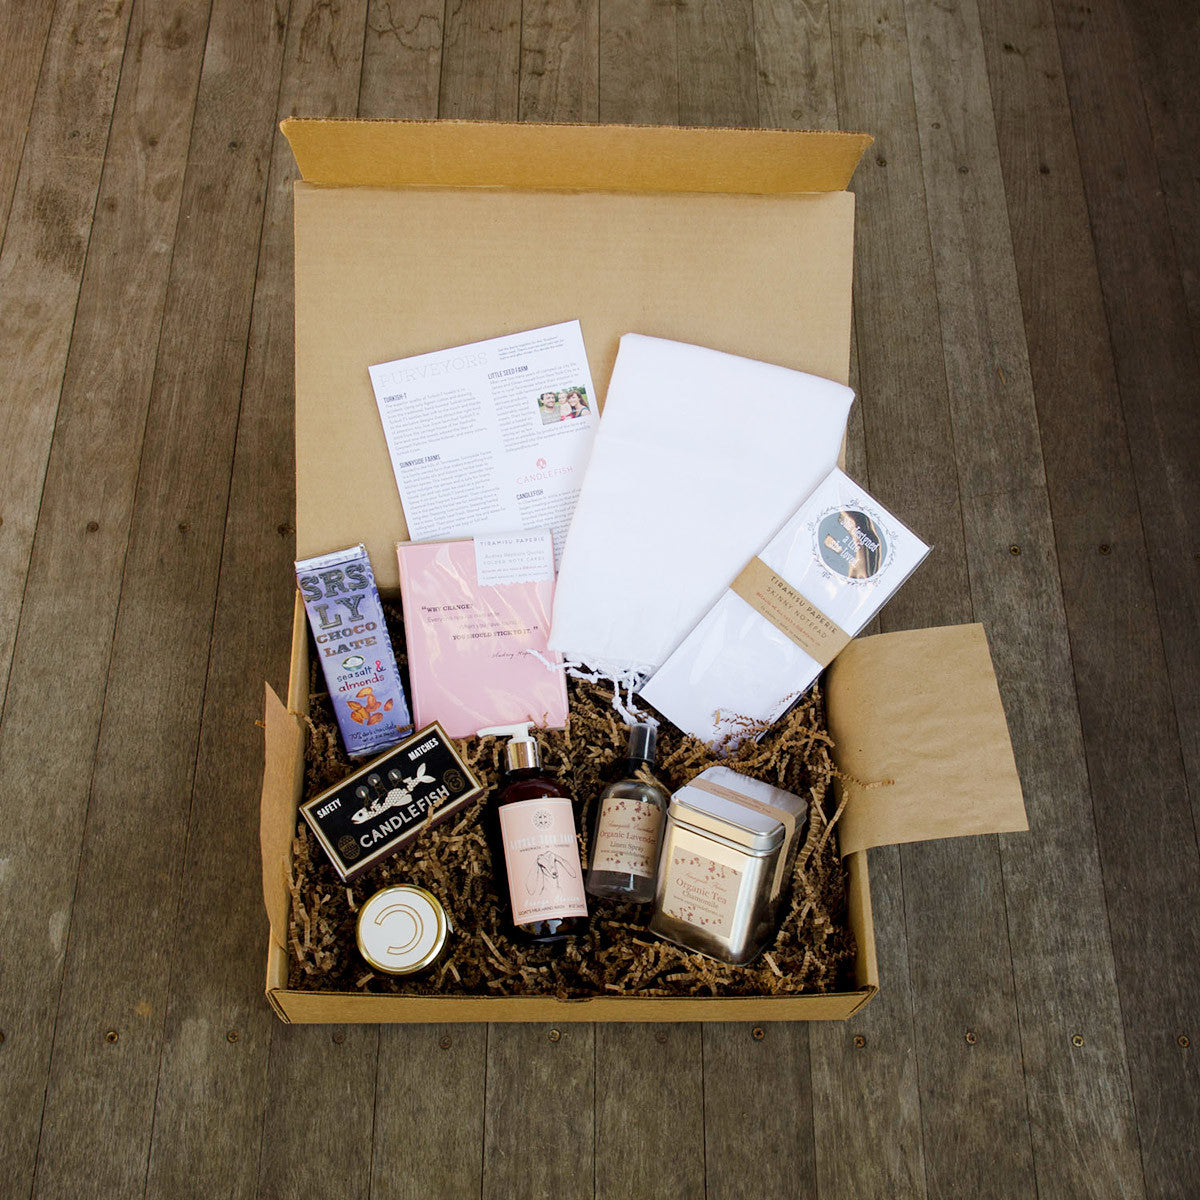 A Peek Inside the Box - The First Women's Deluxe Batch Subscription Discovery Box